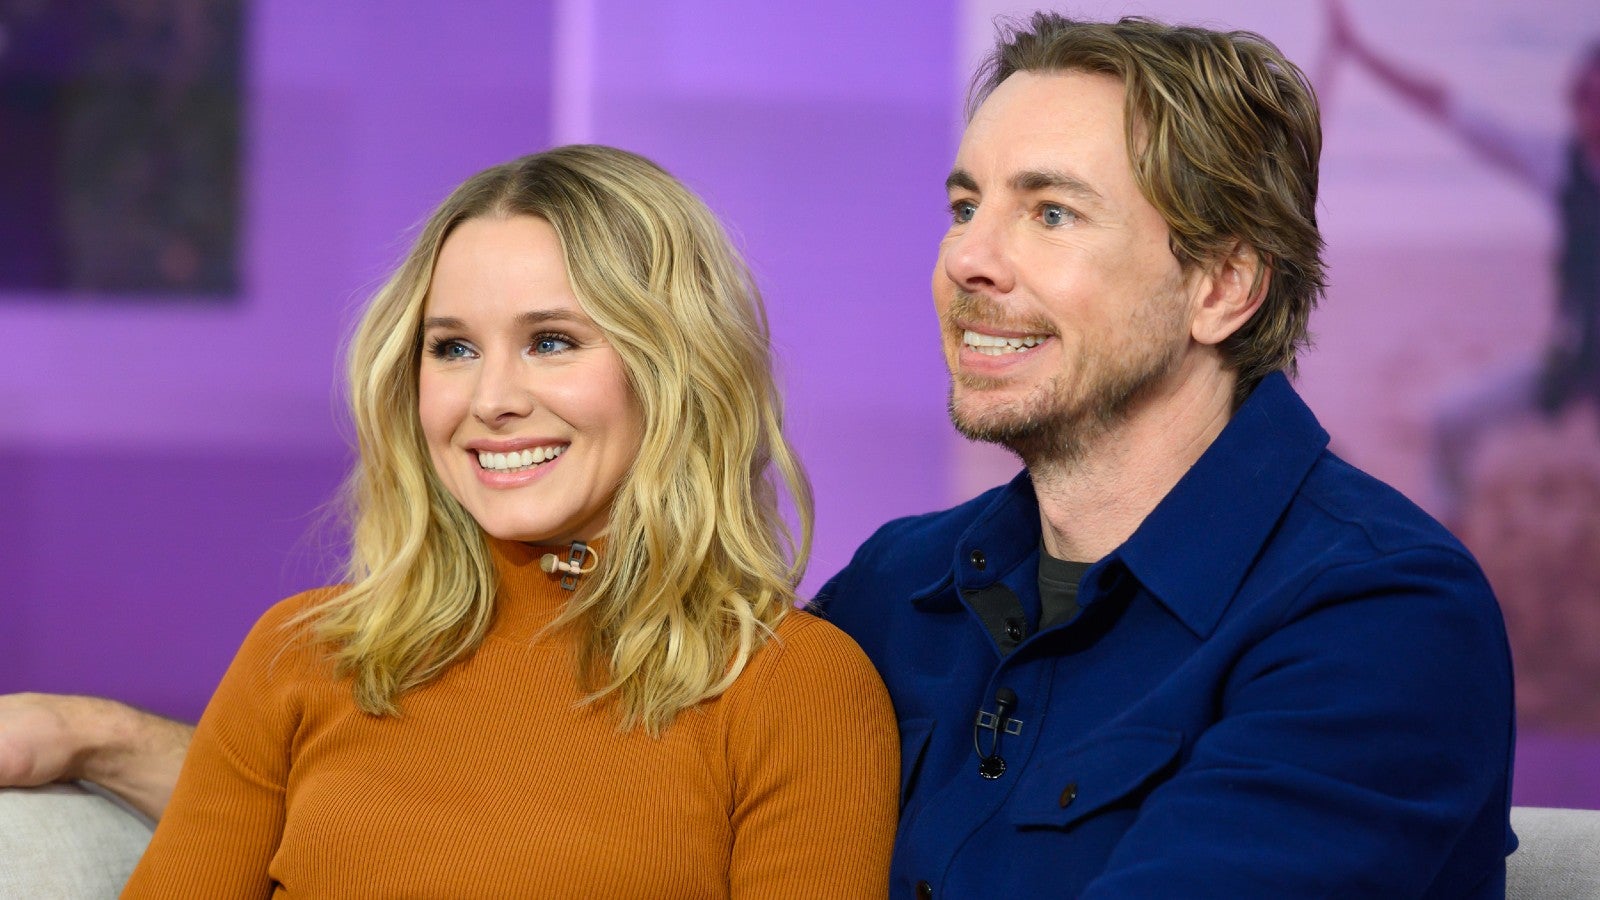 Kristen Bell And Dax Shepard Reveal Who They Would Want To Play Kristen In A Movie Exclusive Entertainment Tonight